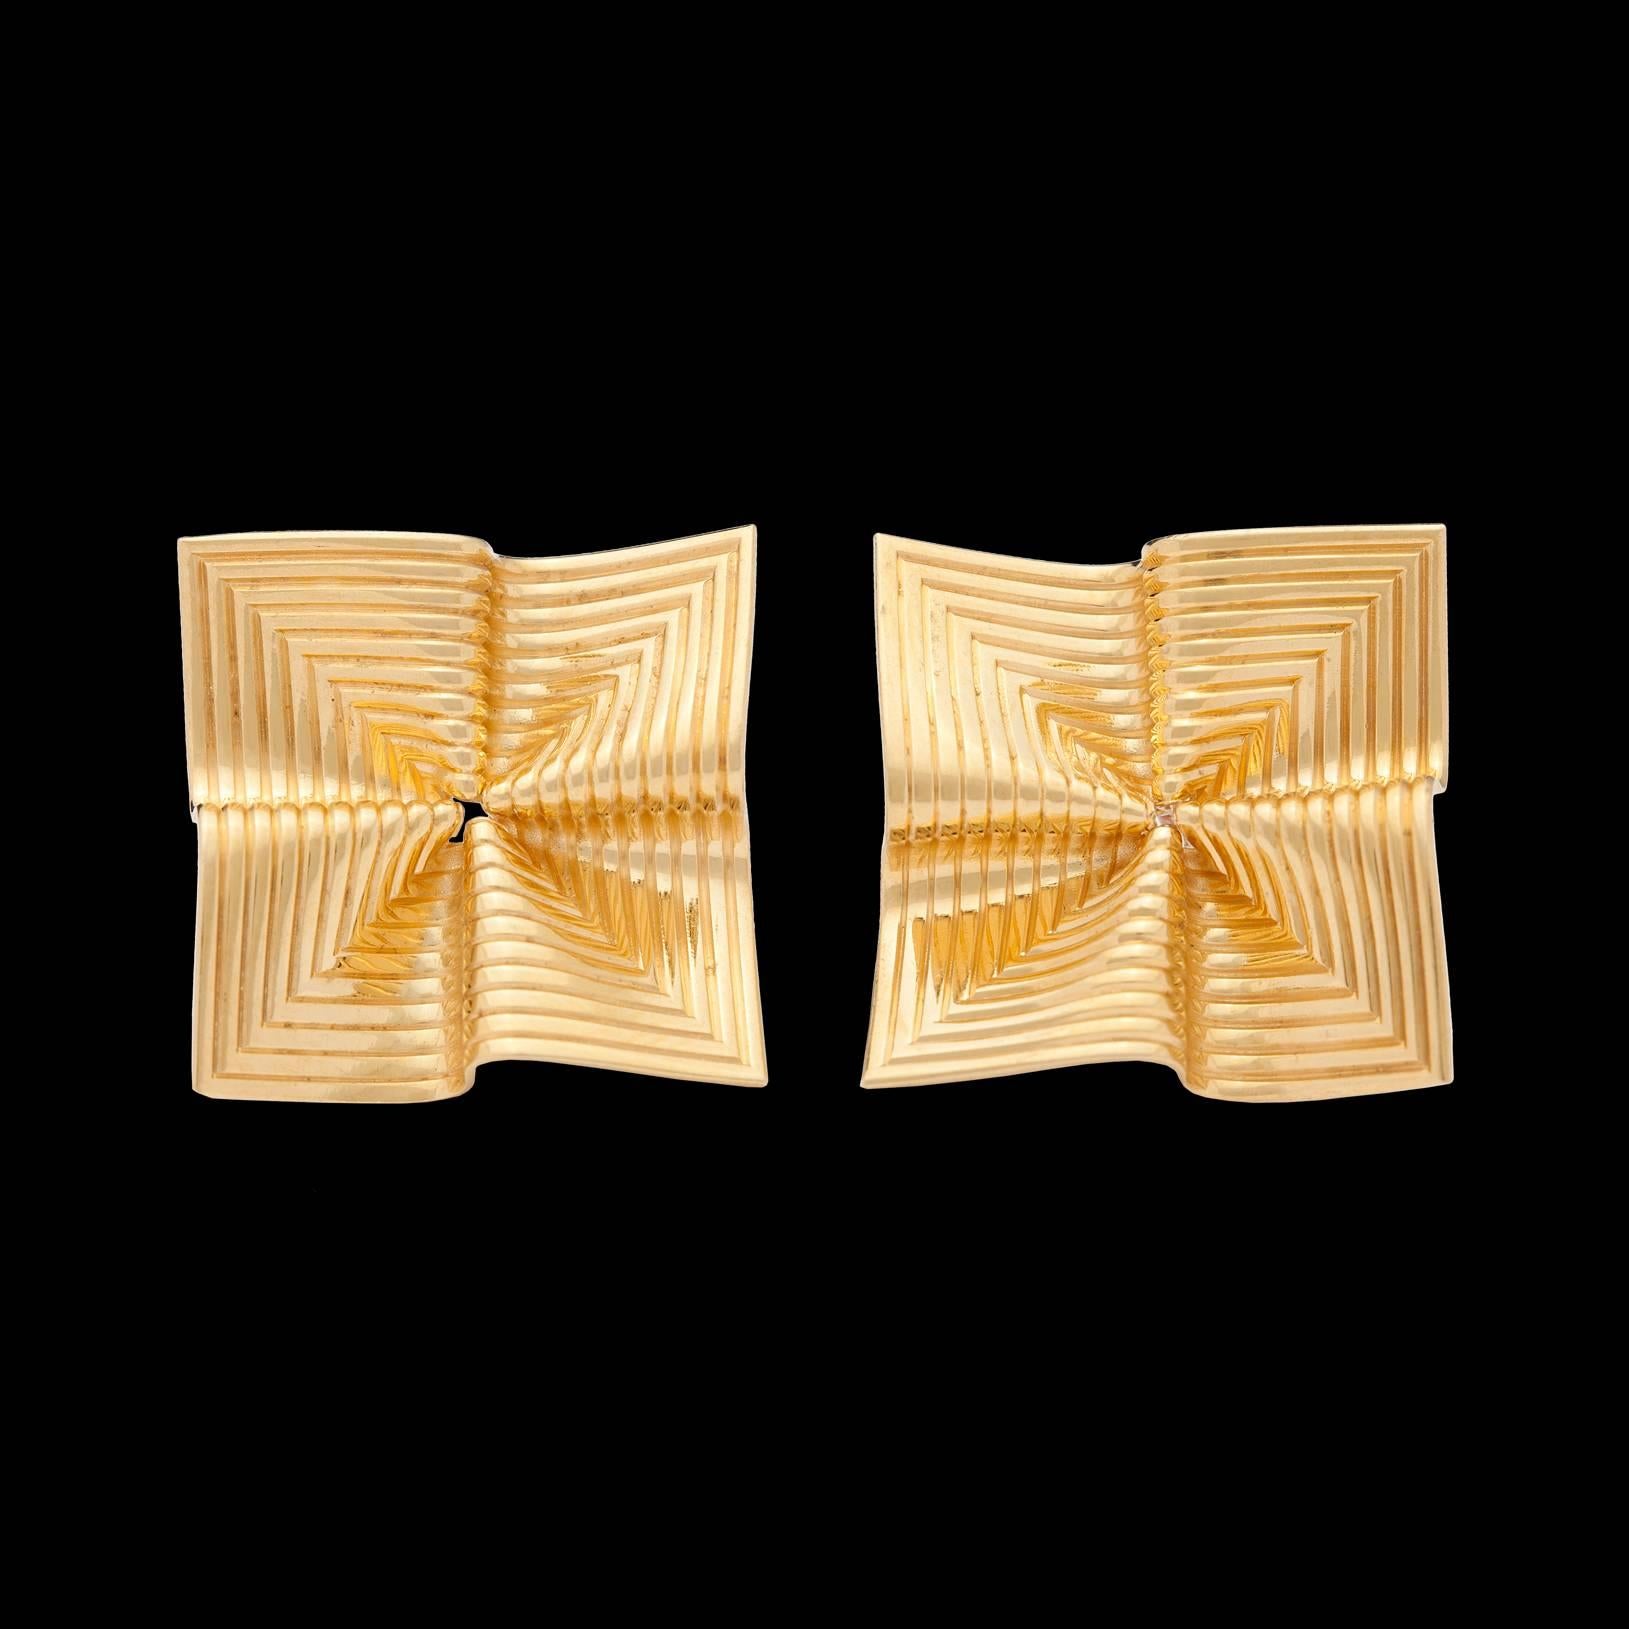 Tiffany & Co. Vintage 18Kt Yellow Gold Fluted Fan Design Earrings with posts & friction backs. The Earrings measure 16.0mm in diameter, & weigh 4.1 grams total for the pair.